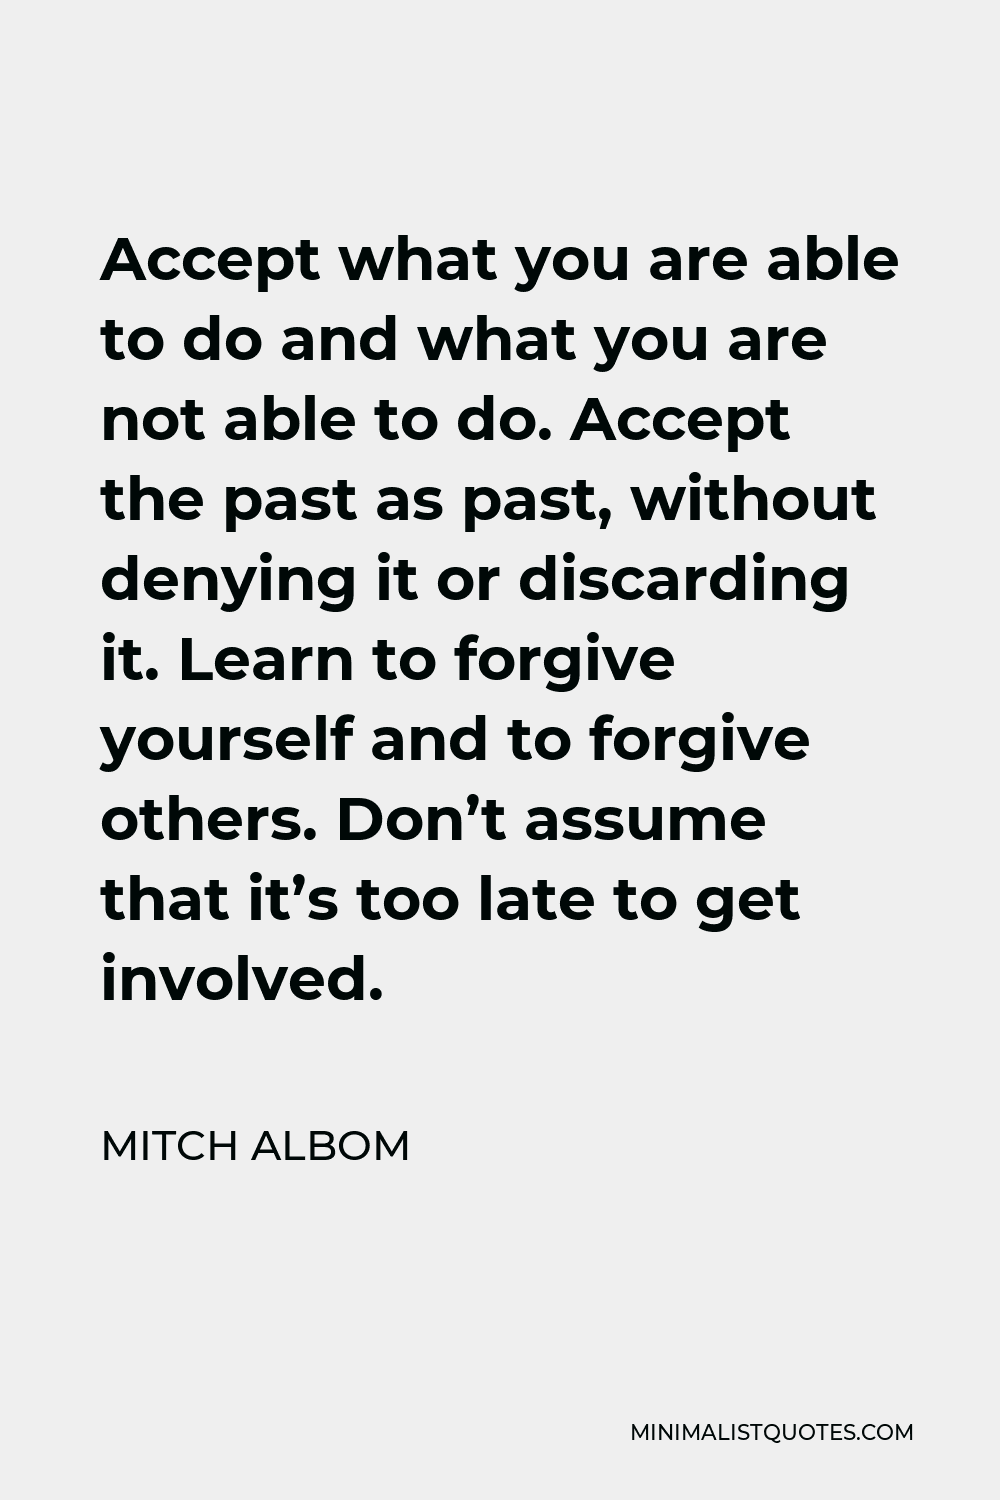 Mitch Albom Quote - Accept what you are able to do and what you are not able to do. Accept the past as past, without denying it or discarding it. Learn to forgive yourself and to forgive others. Don’t assume that it’s too late to get involved.